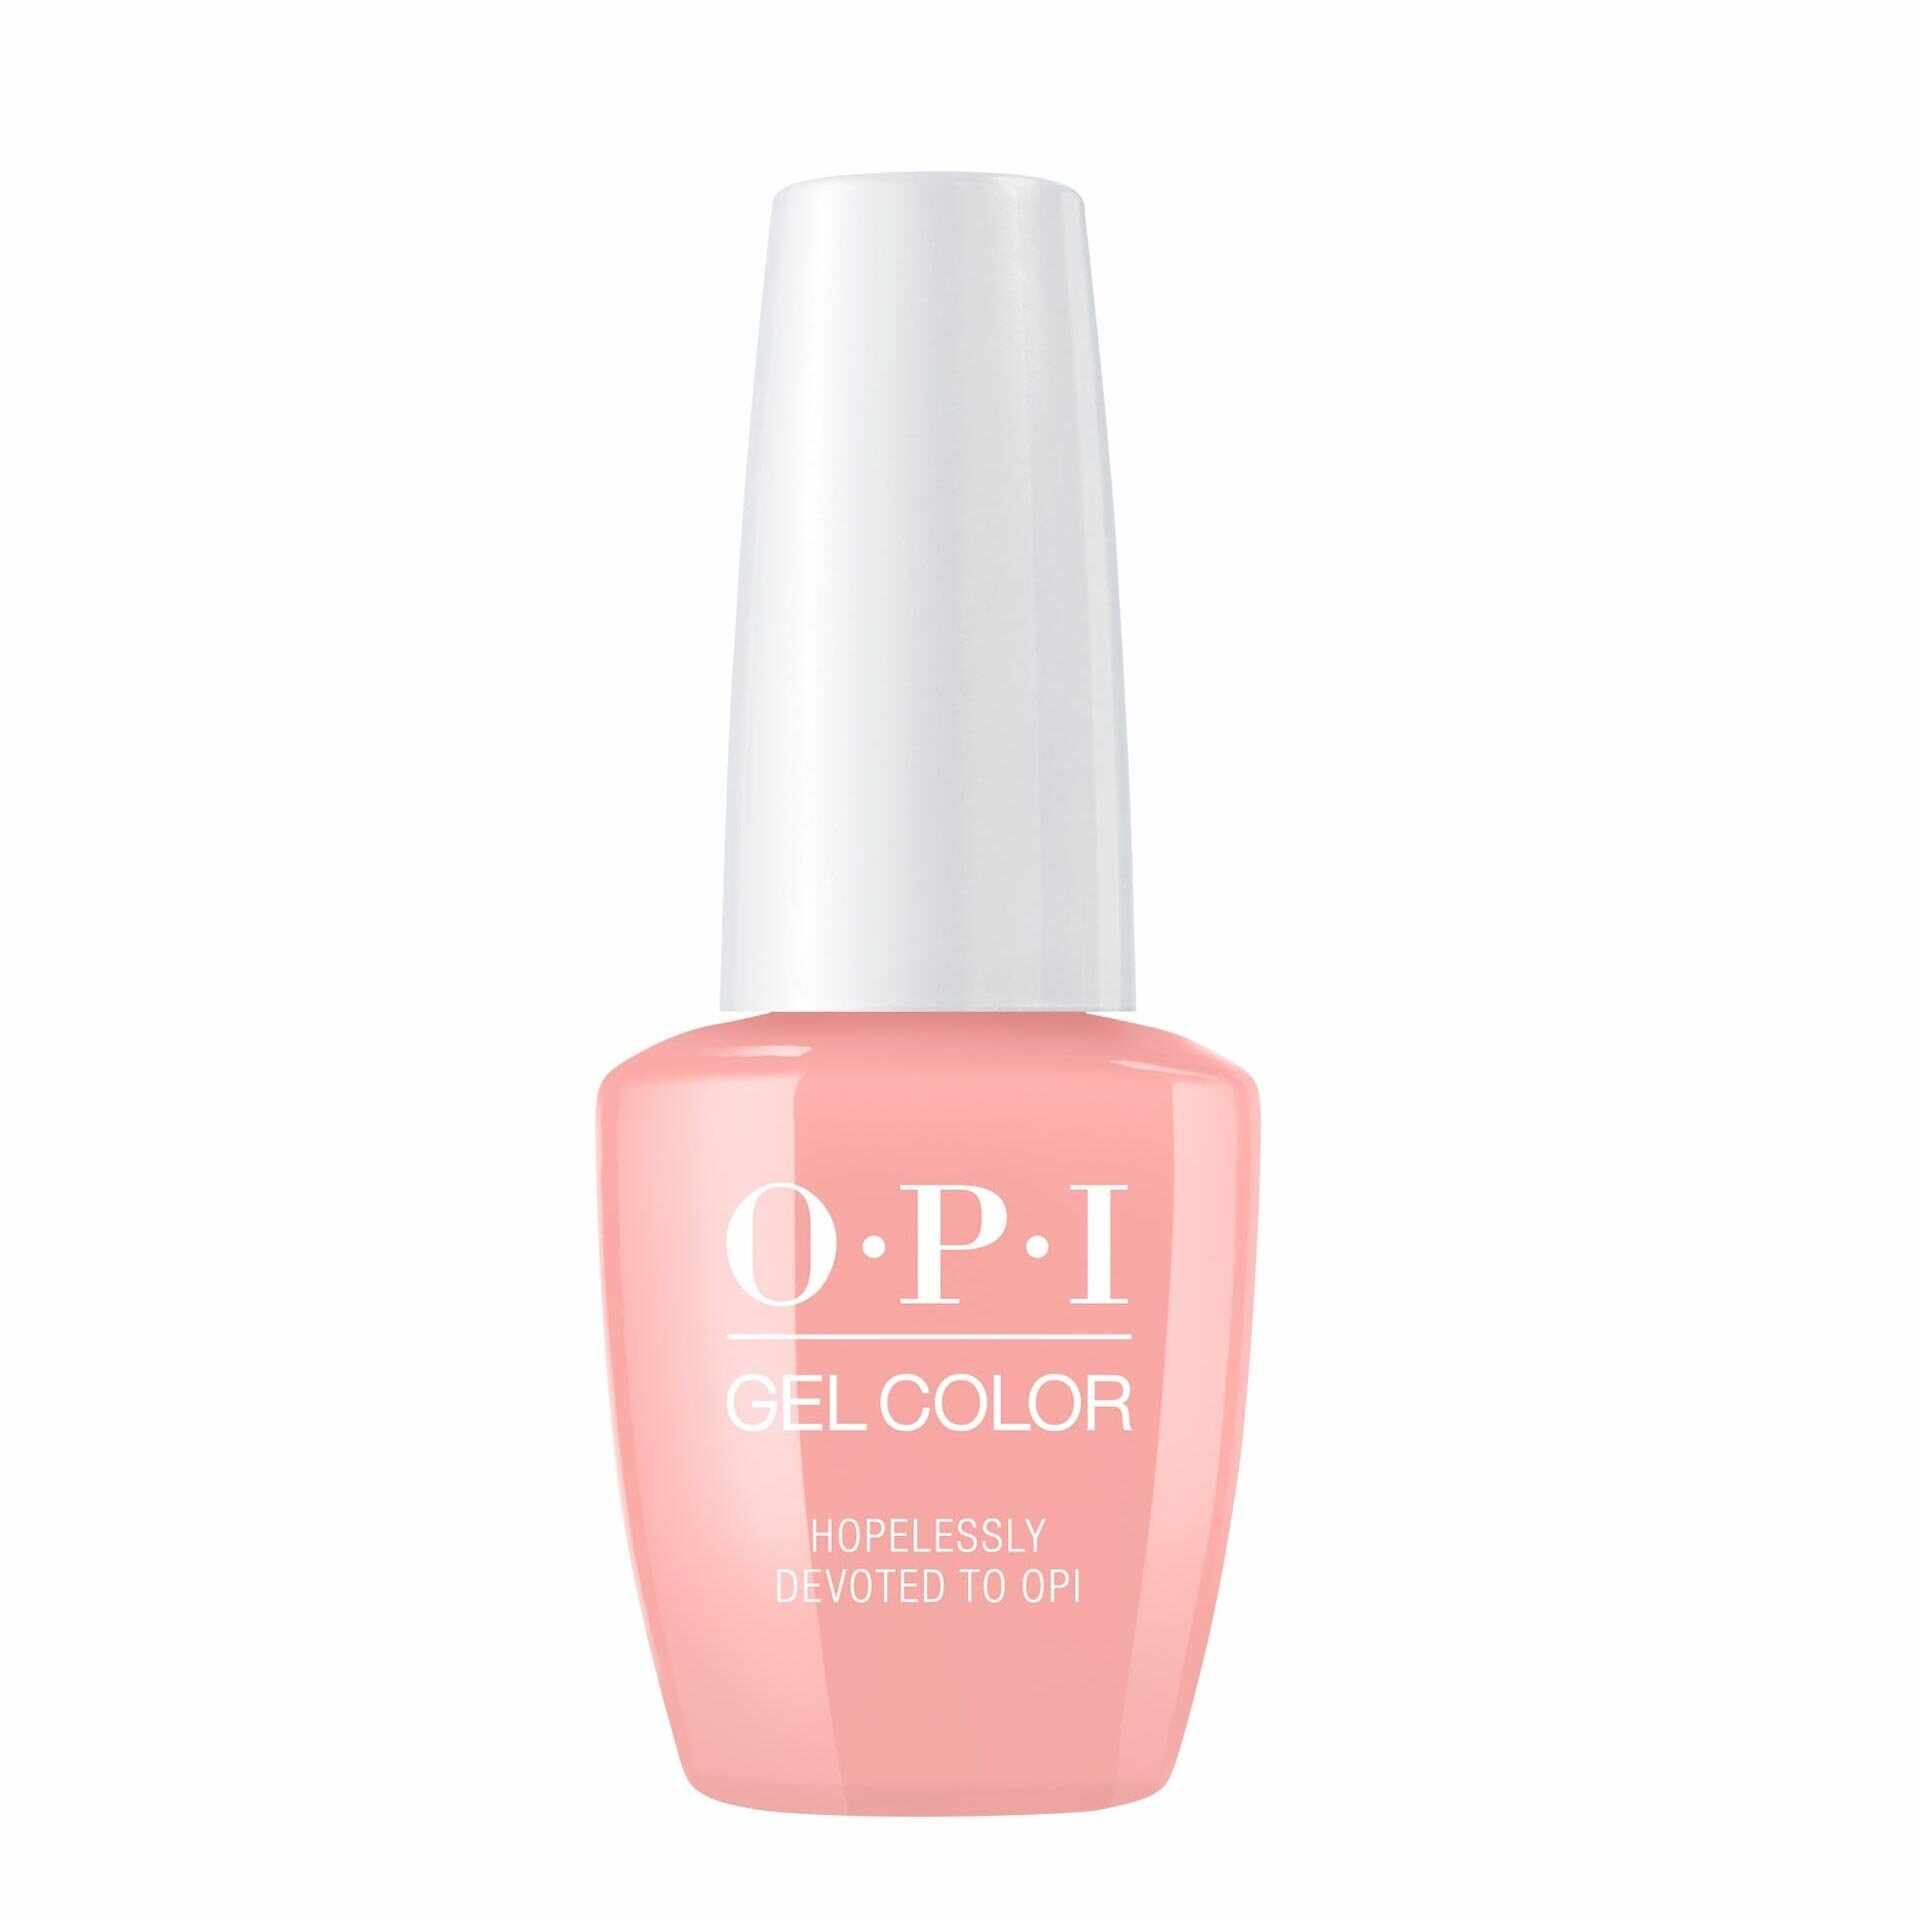 Lac de unghii semipermanent OPI Gel Color Hopelessly Devoted To OPI, 7.5ml